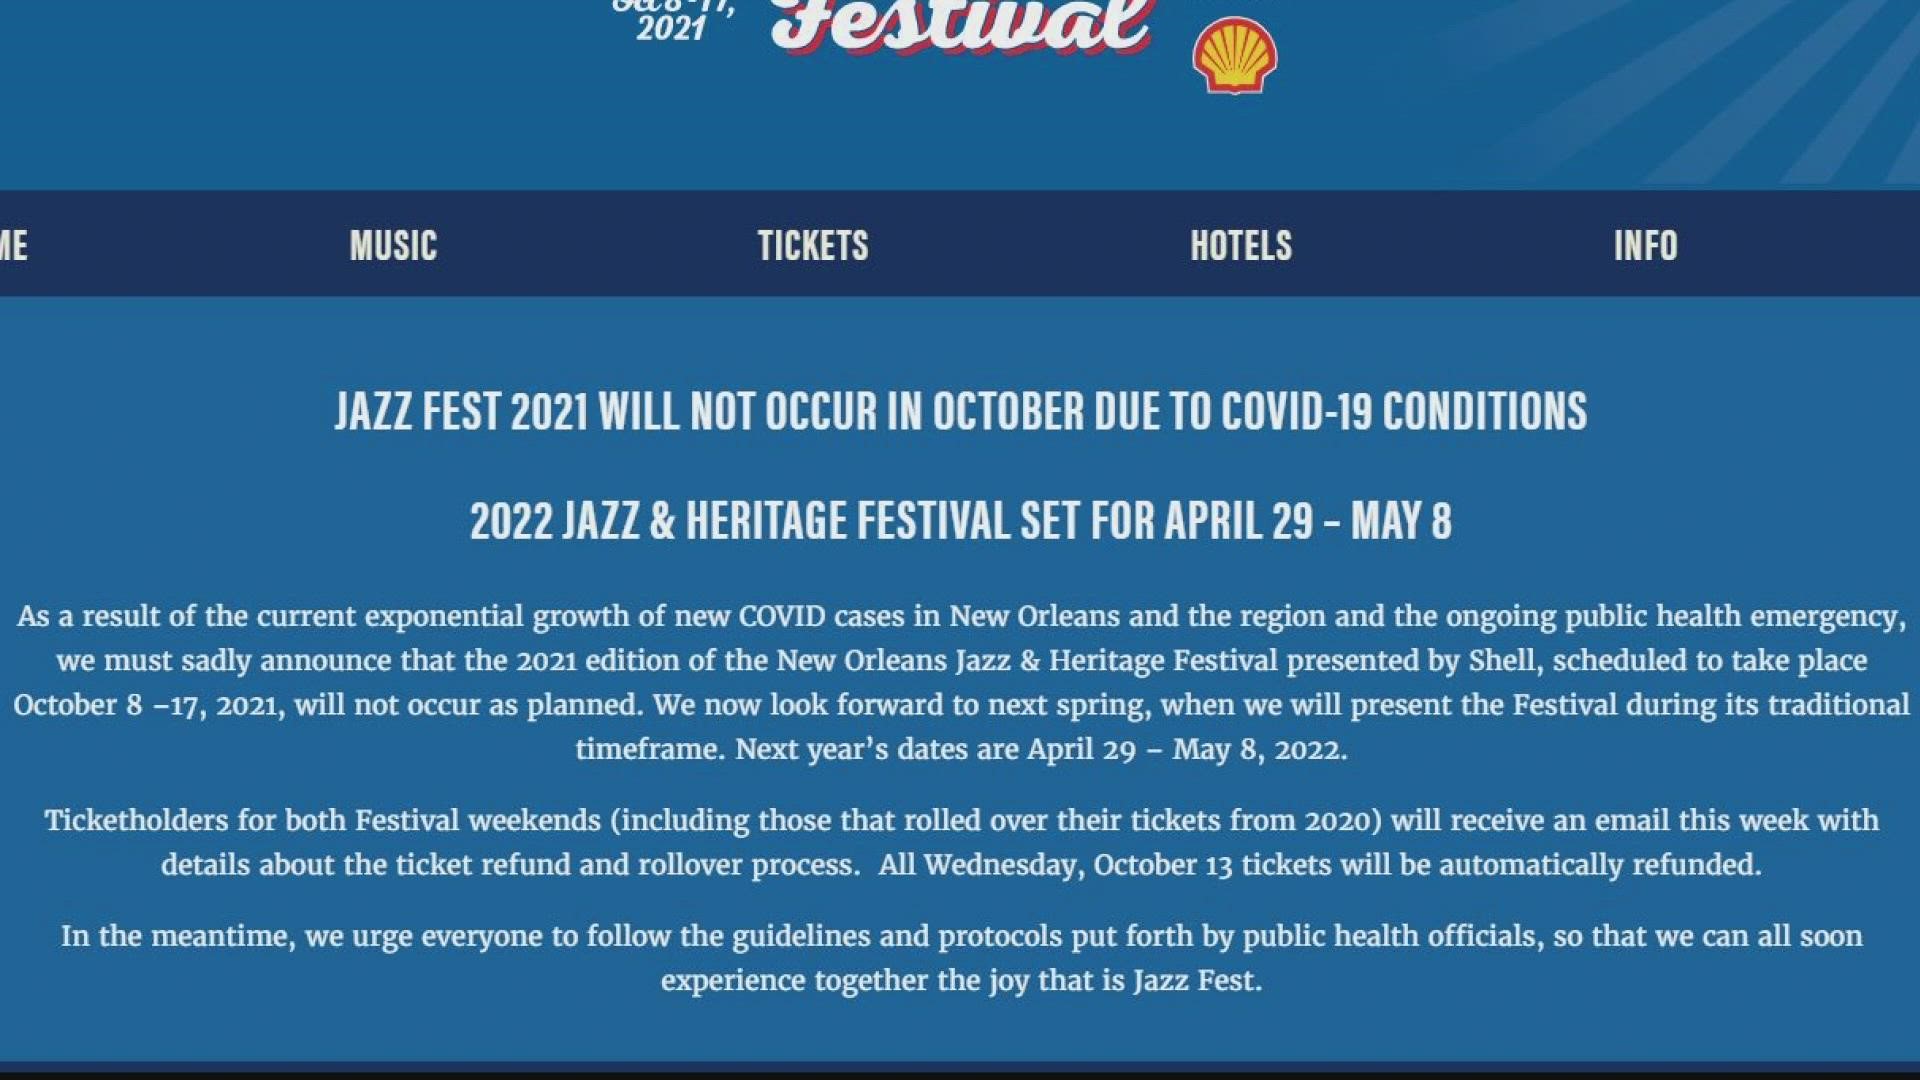 Jazz Fest set in October will not happen due to the recent surge in COVID cases in New Orleans